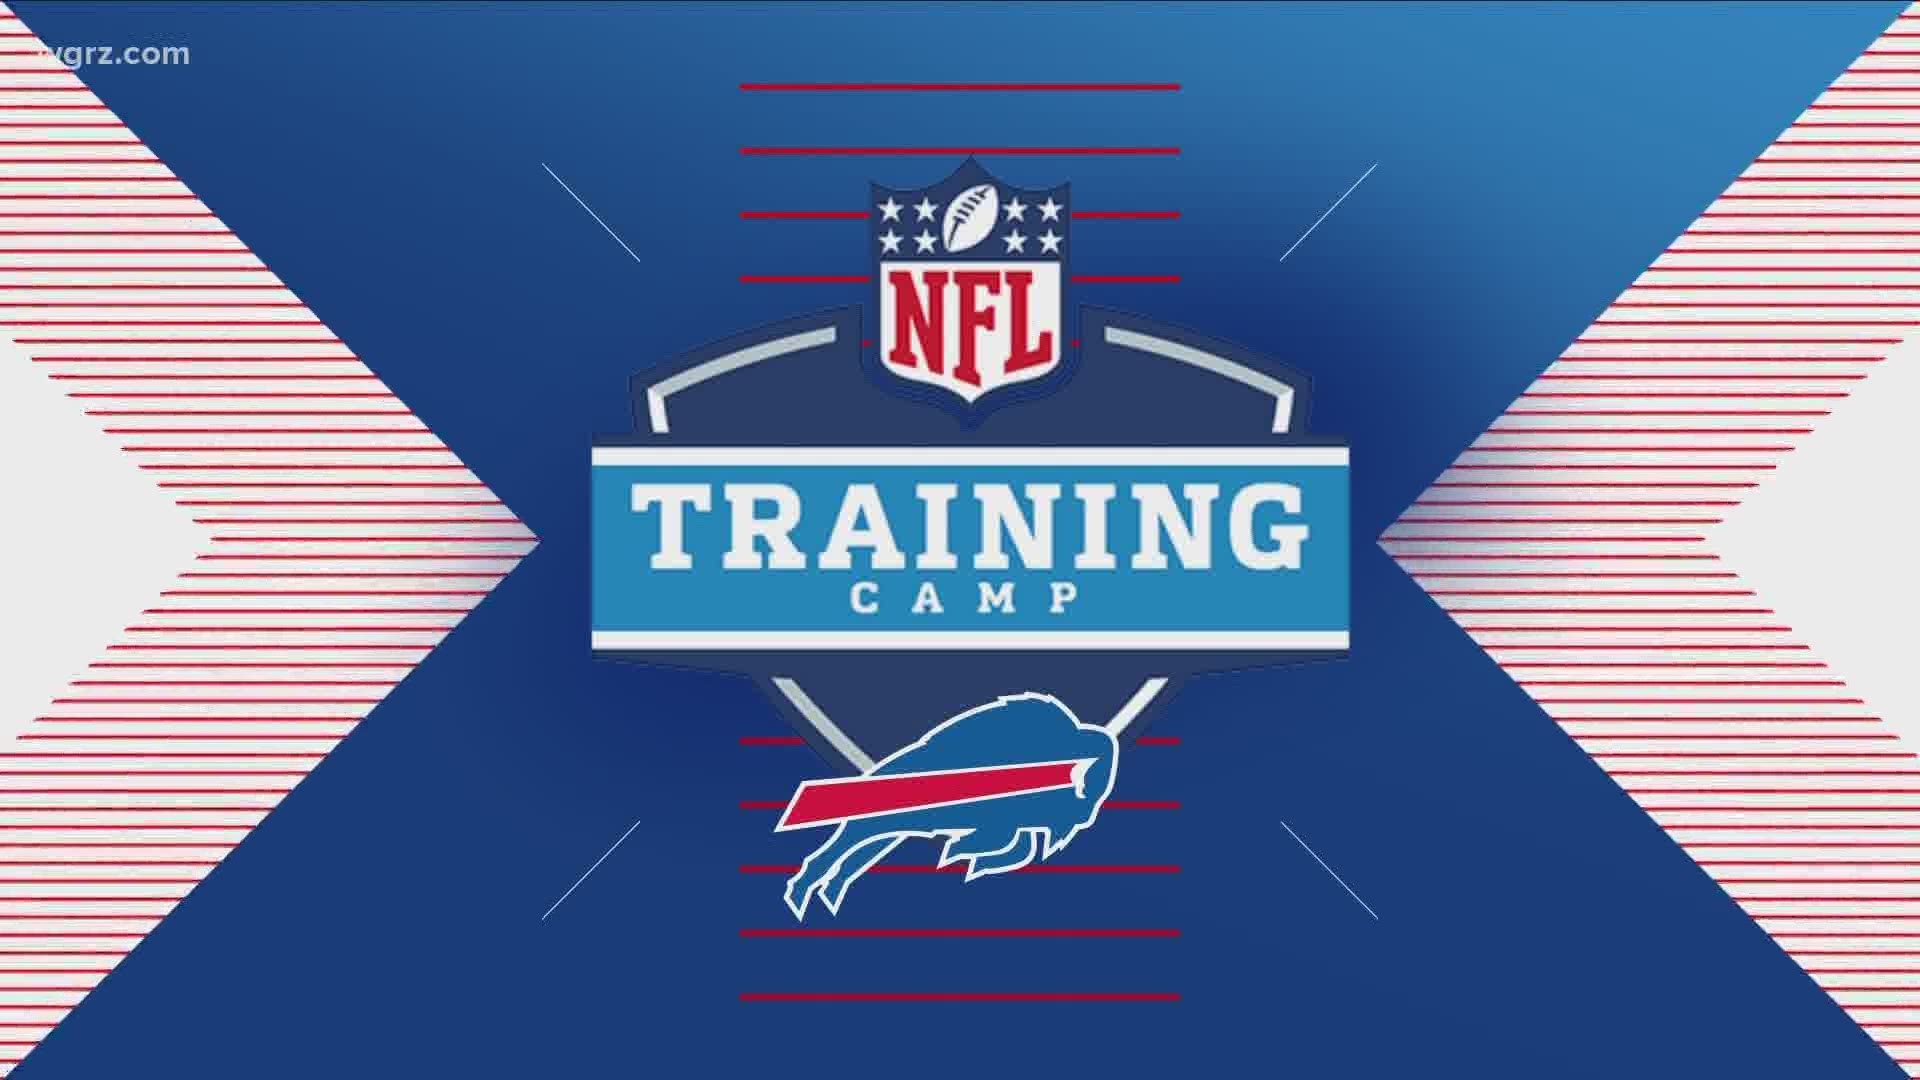 The Buffalo Bills will be preparing for the fall season at their facilities in Orchard Park and safety will be a big priority.